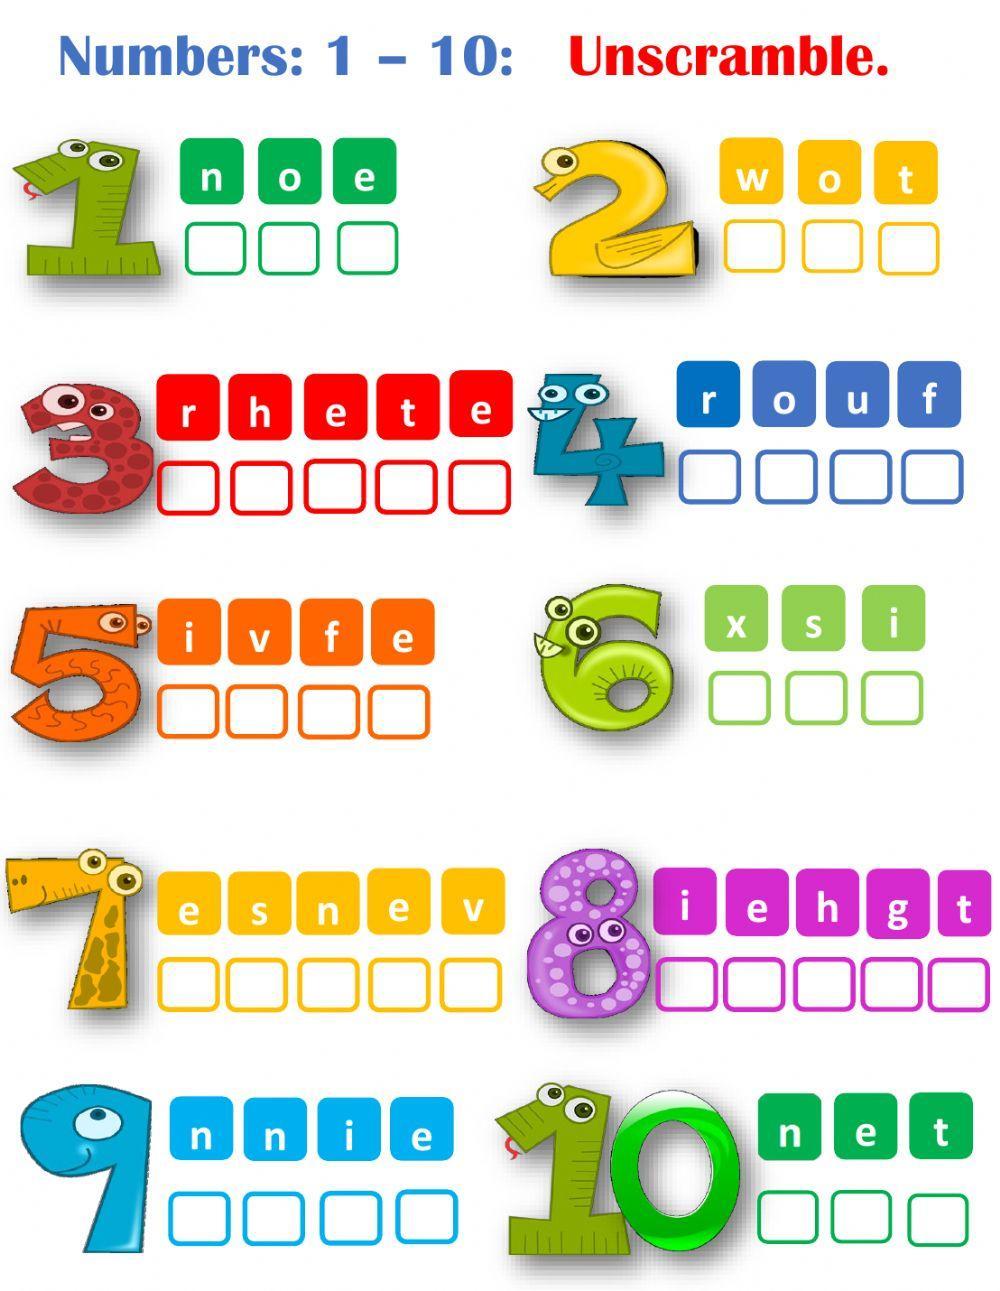 Numbers 1-10 unscramble